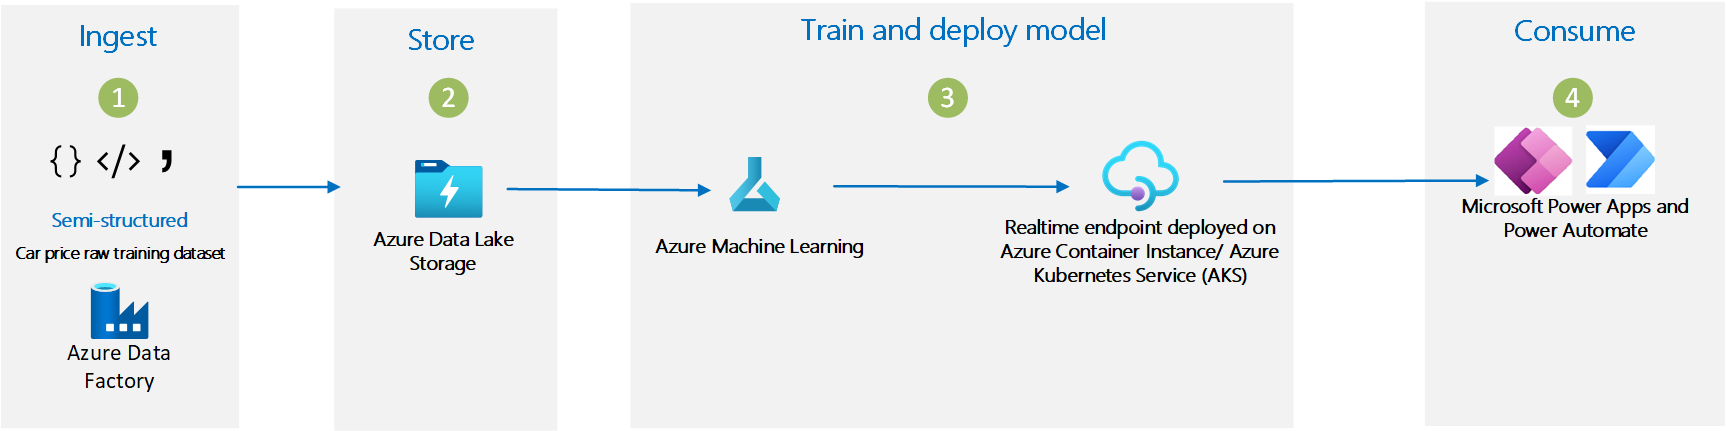 Real Time Machine Learning Architecture On Azure Azure Architecture Center Microsoft Learn